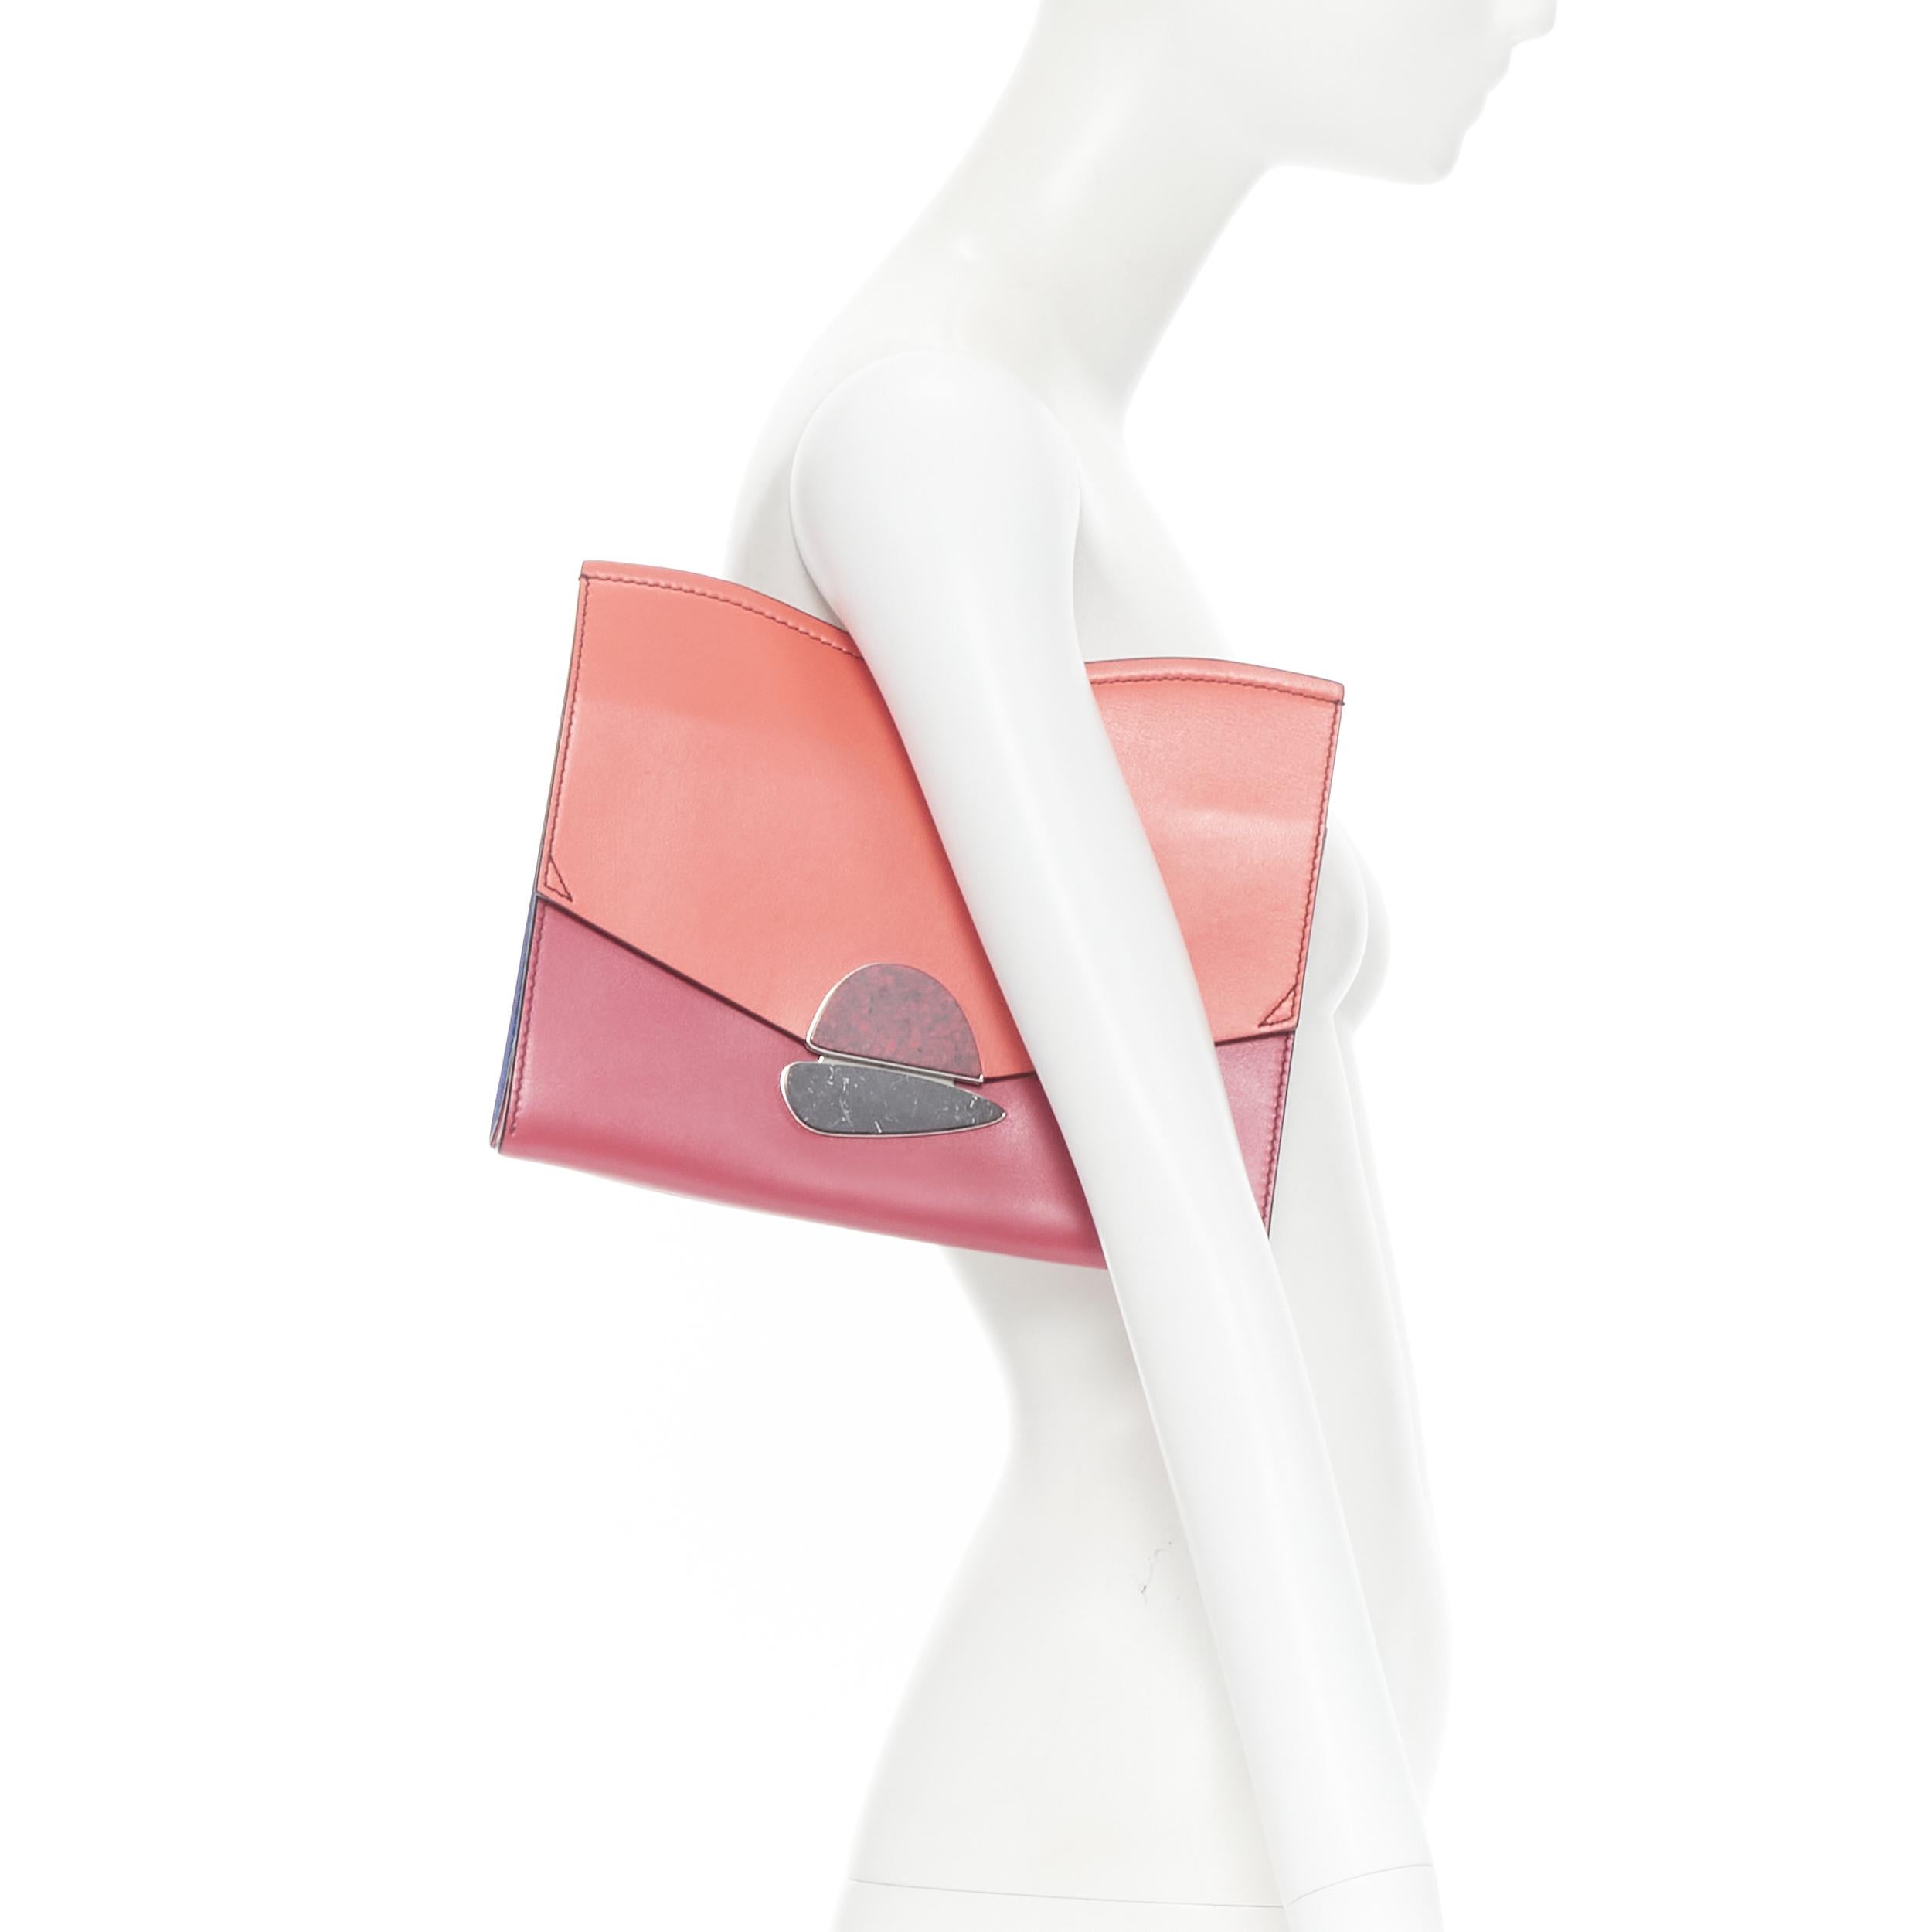 PROENZA SCHOULER coral red leather marble stone flap wavy topline clutch bag 
Reference: TALI/A00001 
Brand: Proenza Schouler 
Designer: Proenza Schouler 
Model: Stone pebble clutch 
Material: Leather 
Color: Red 
Pattern: Solid 
Closure: Magnet